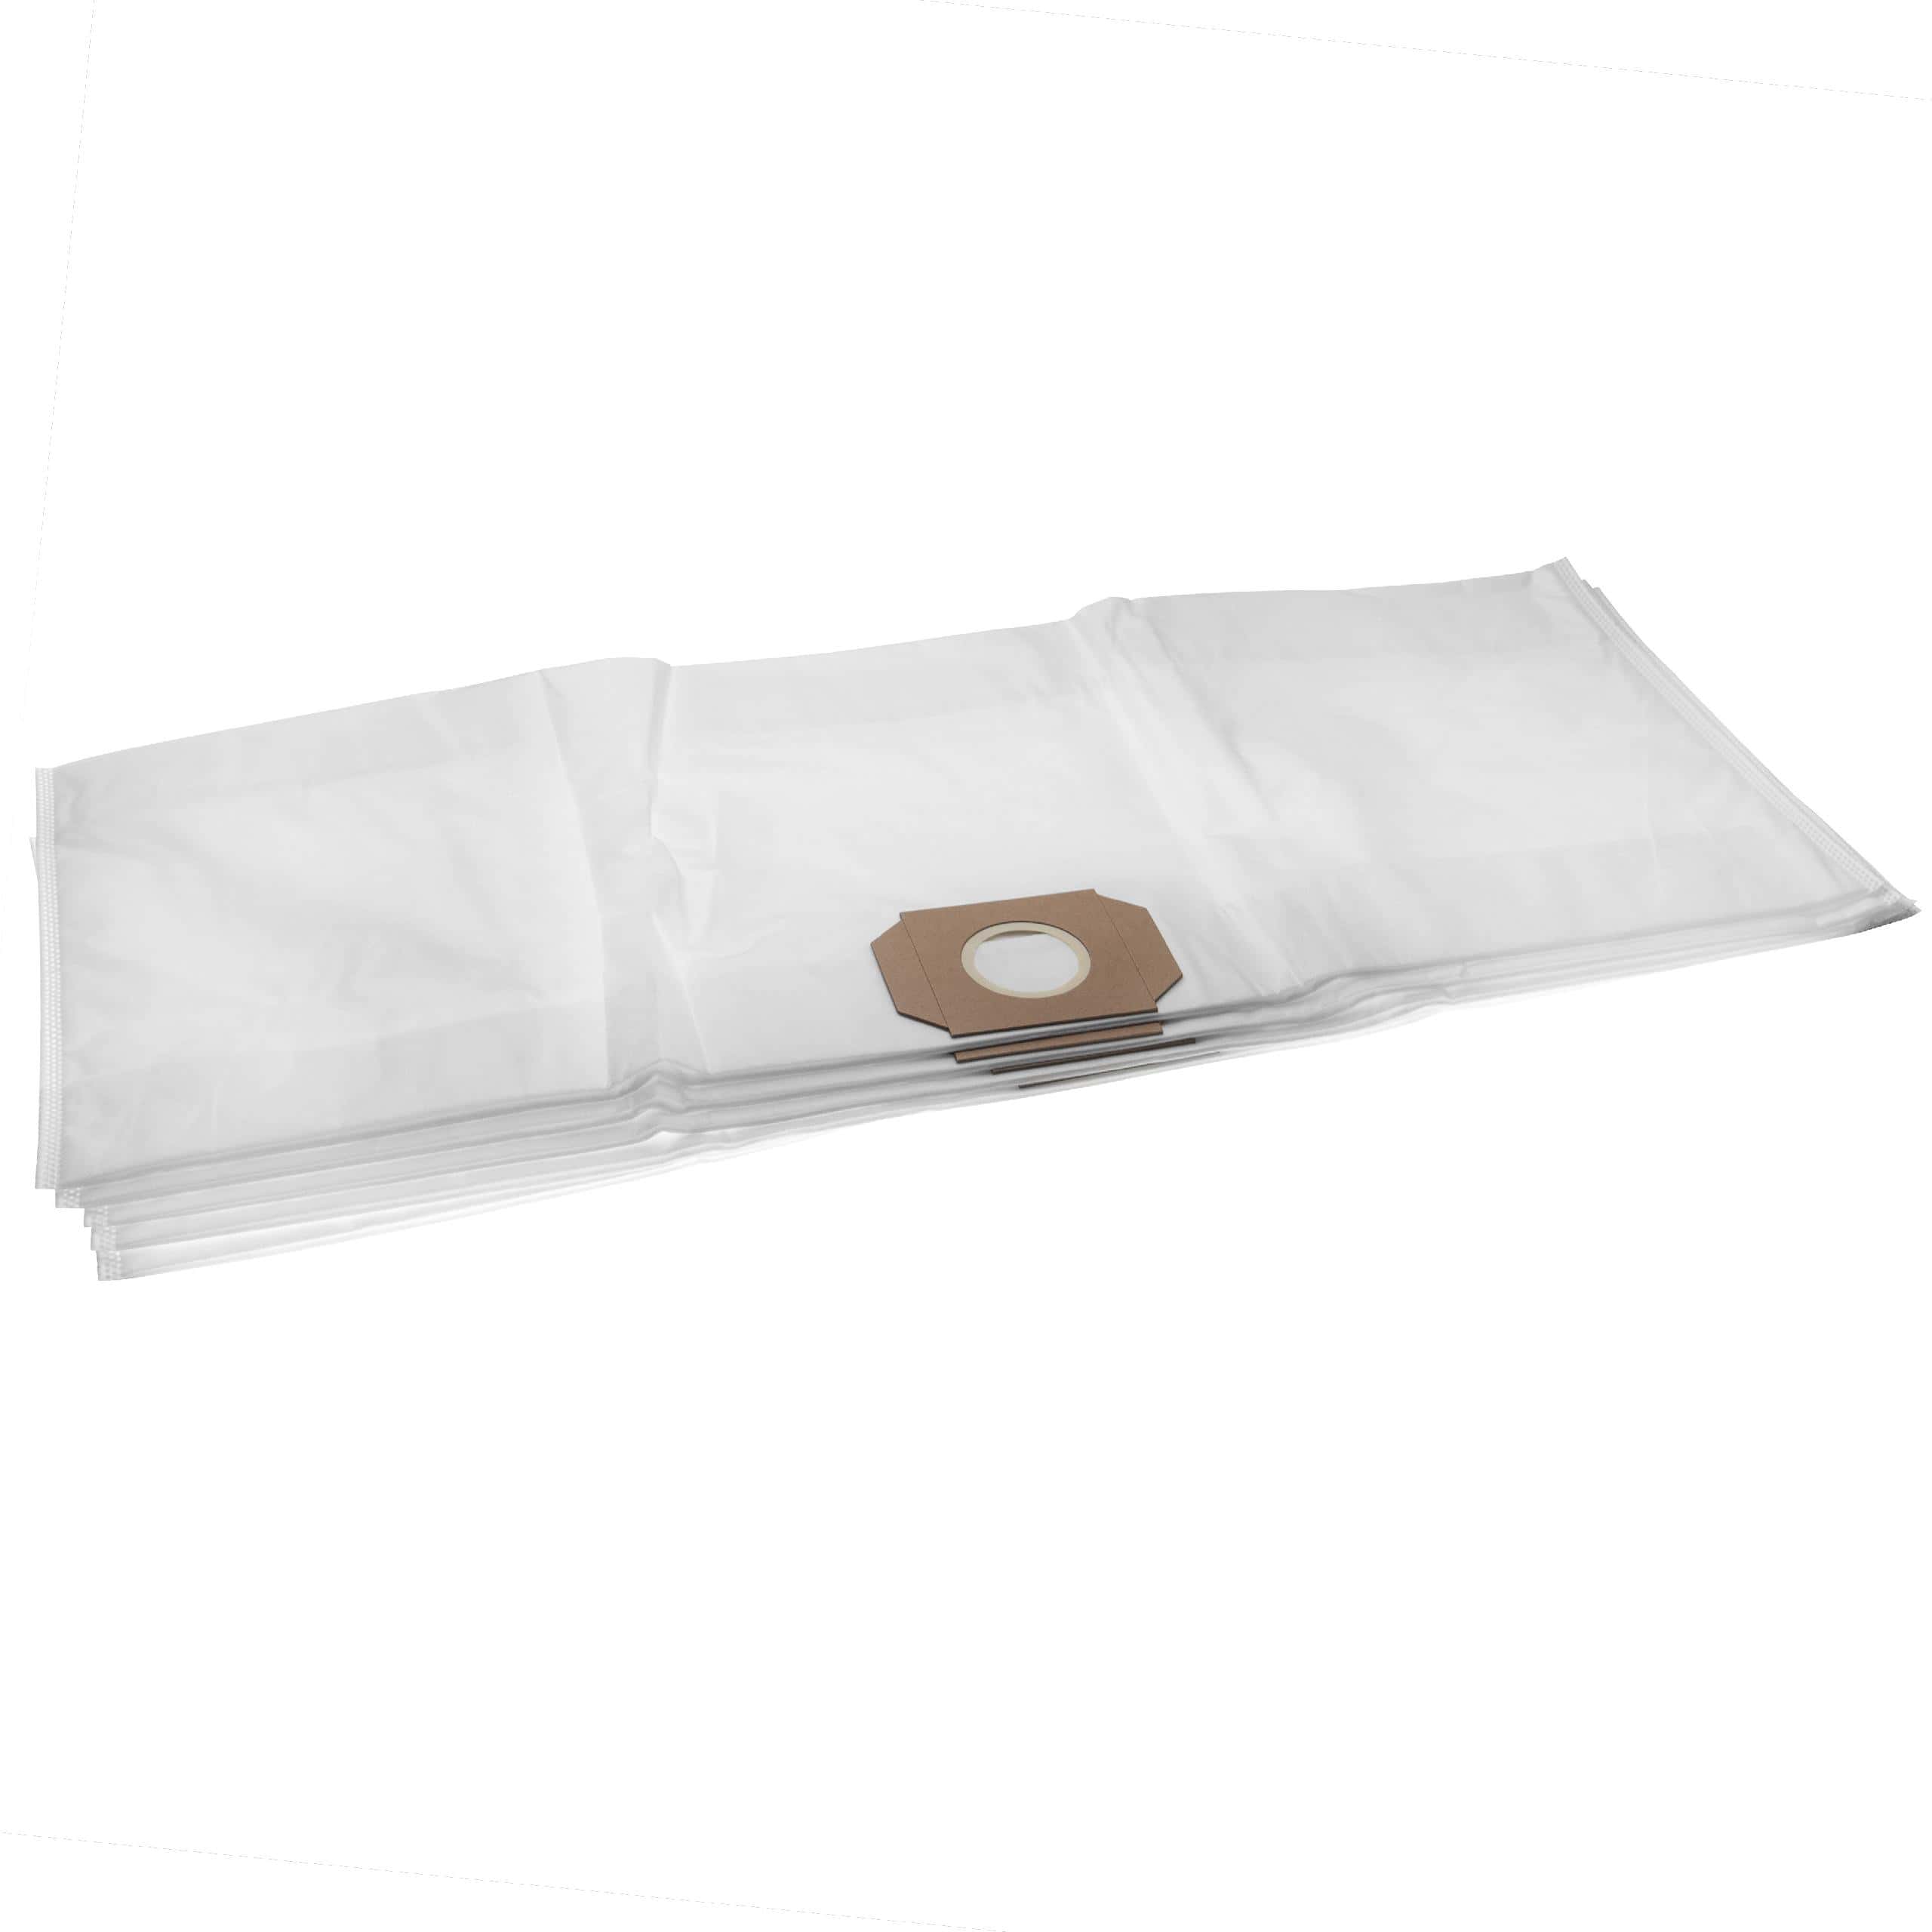 5x Vacuum Cleaner Bag replaces Thomas 450, 787179, 787114 for Thomas - microfleece